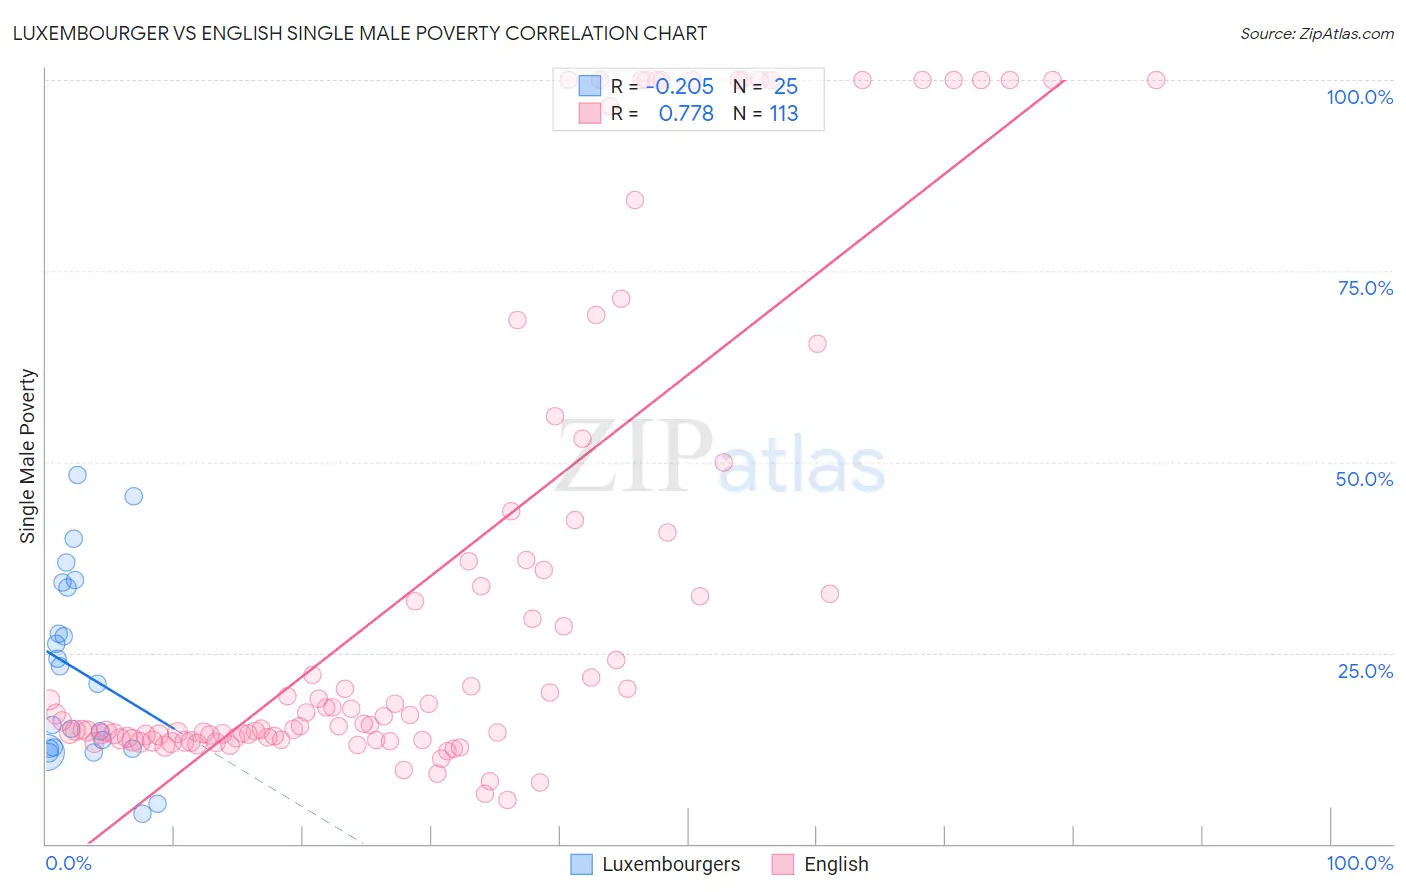 Luxembourger vs English Single Male Poverty